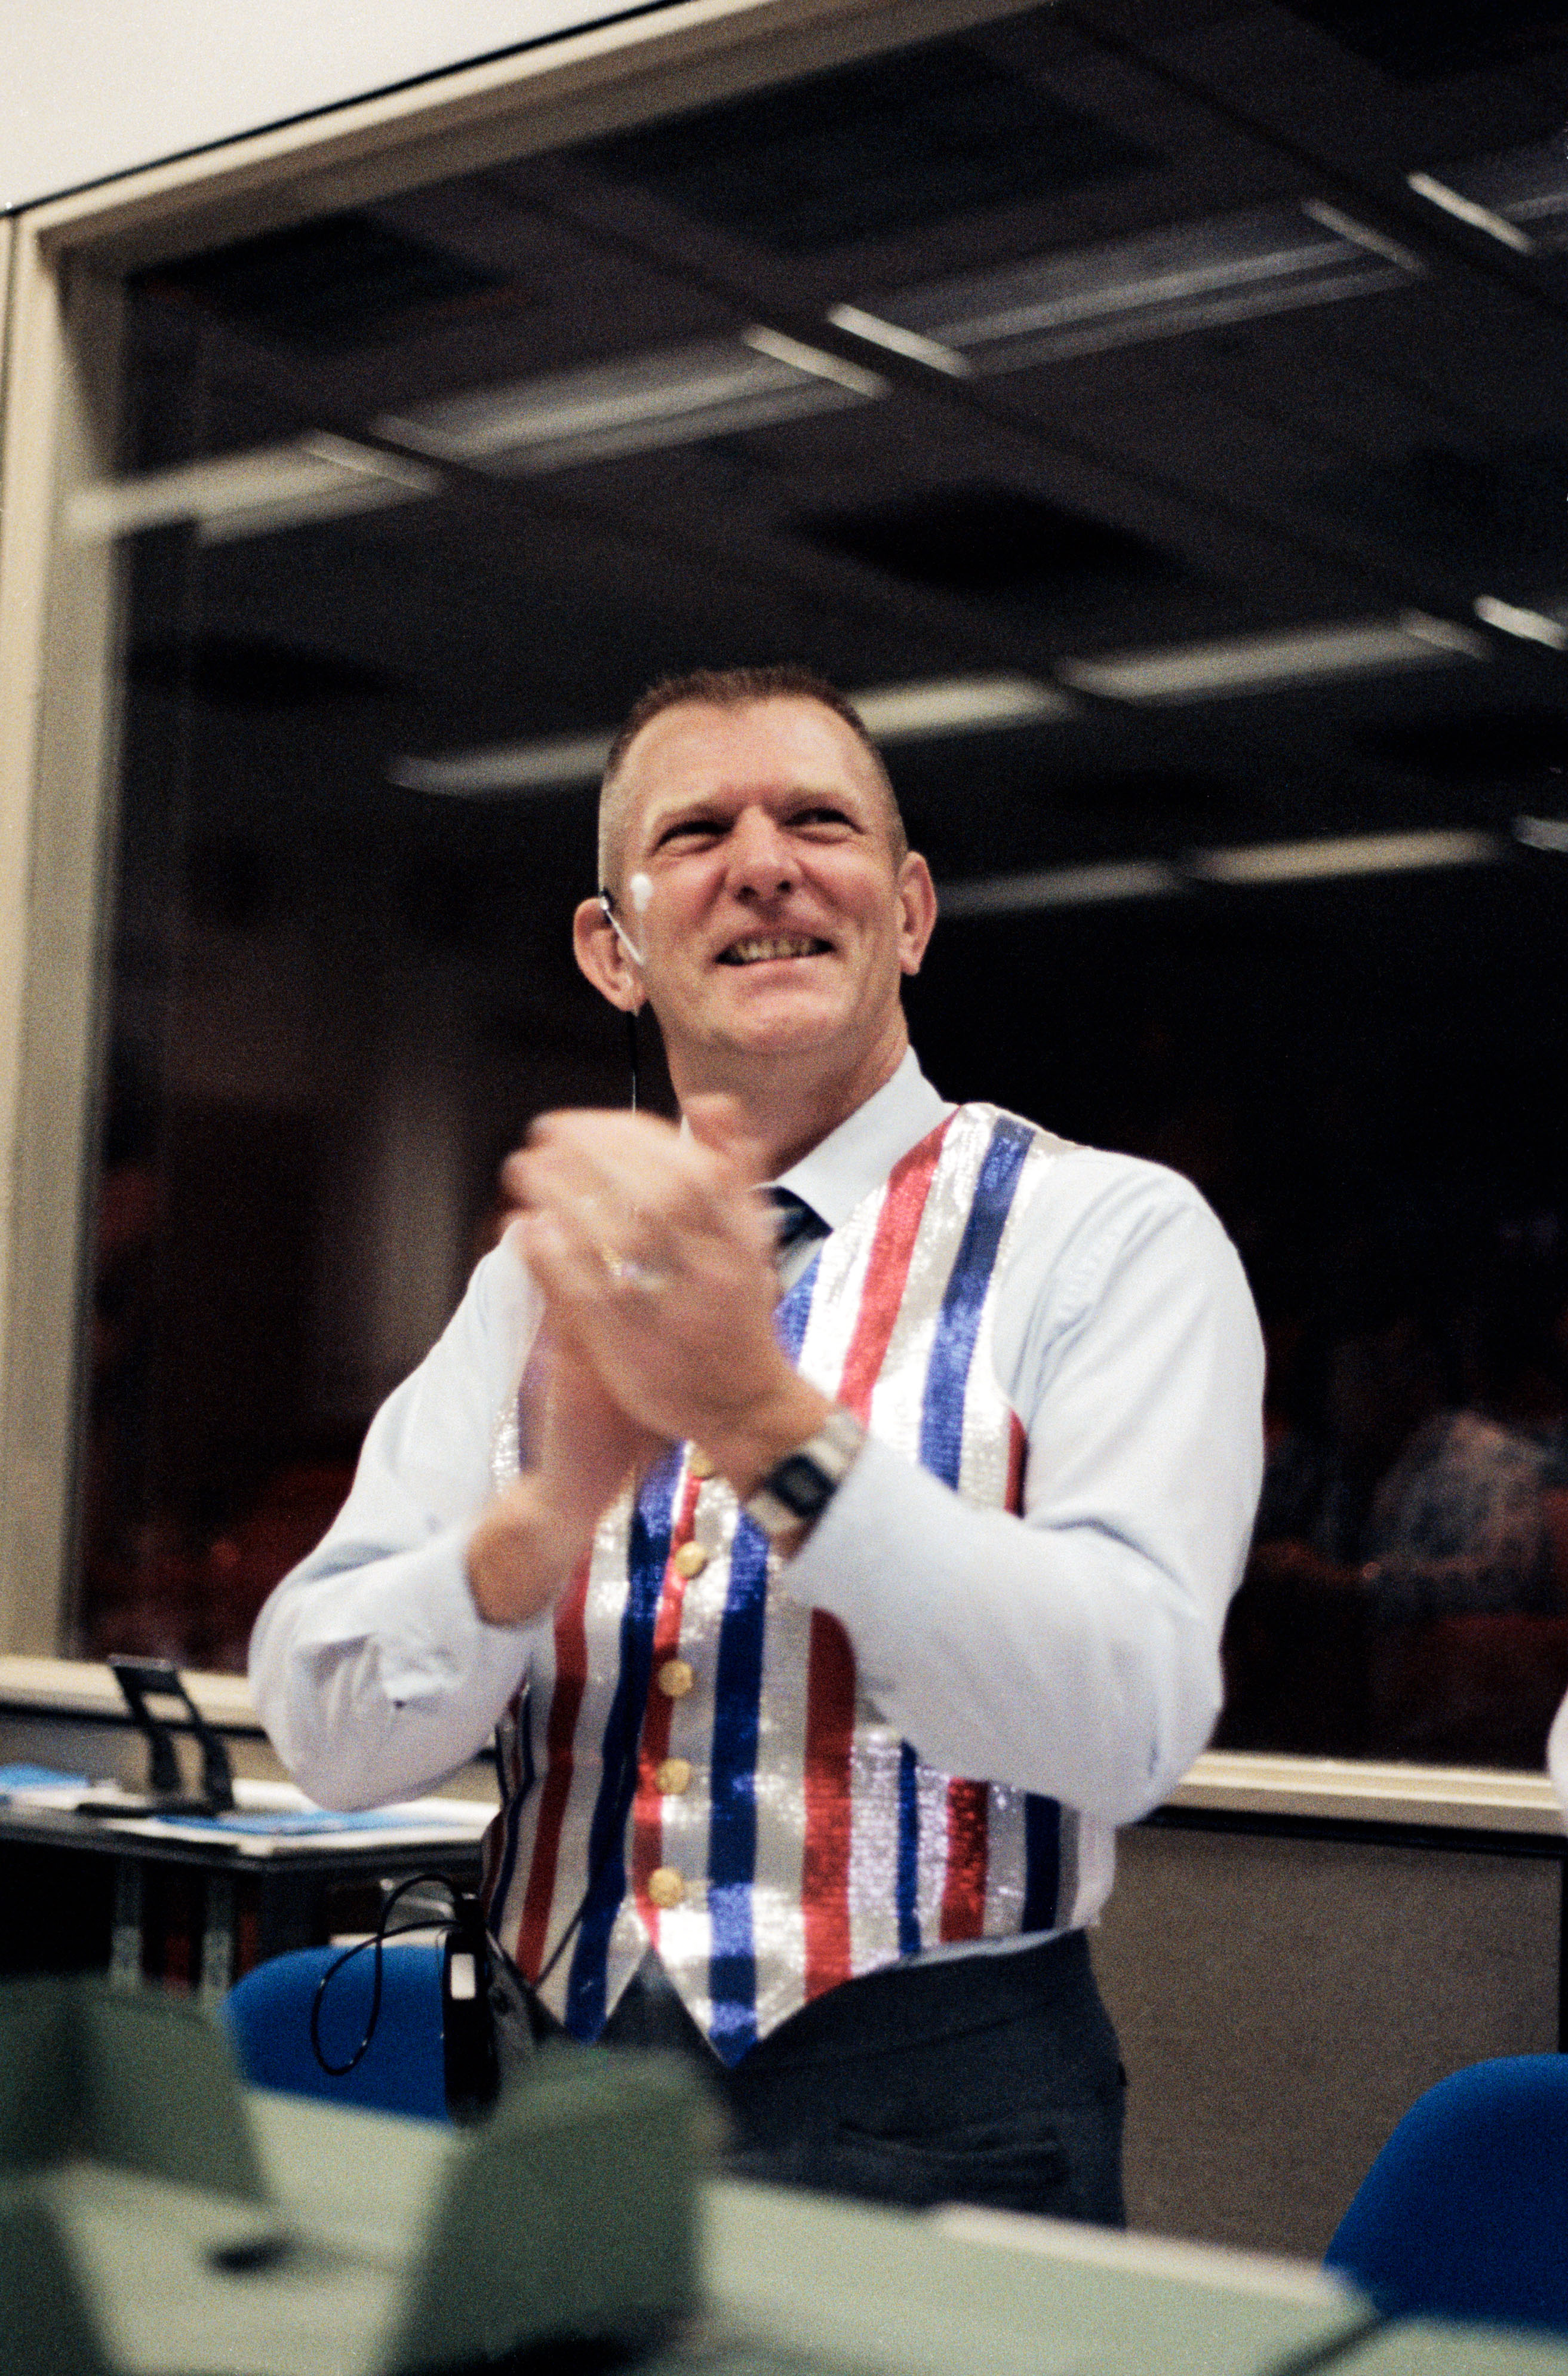 In Mission Control at NASA's Johnson Space Center in Houston, Lead STS-41C Flight Director Eugene F. Kranz applauds the successful landing of STS-41C